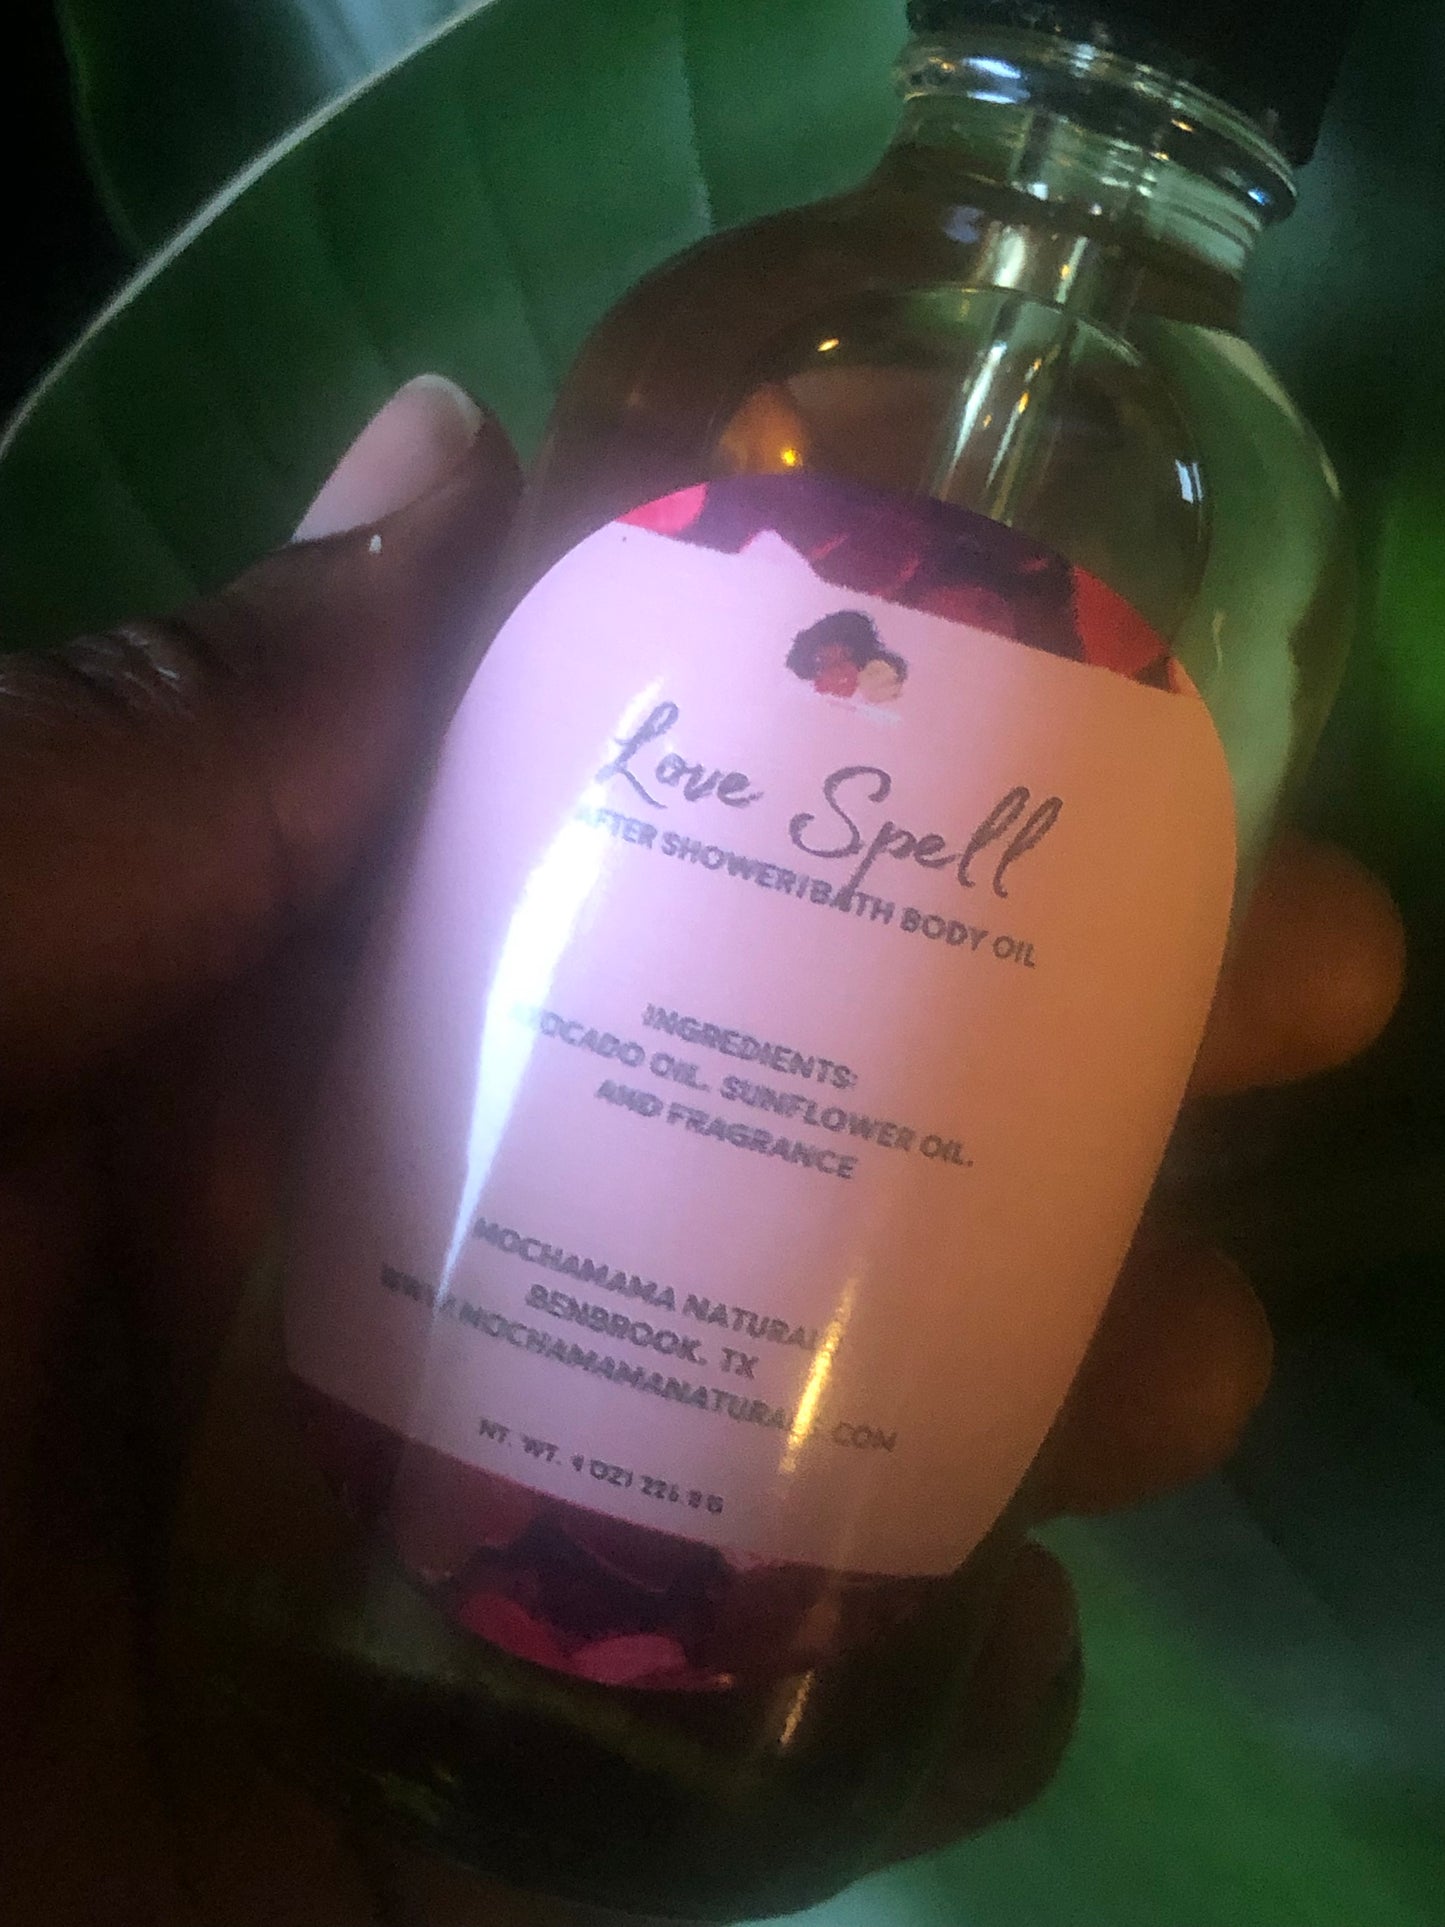 Love Spell After Shower/Bath Body Oil